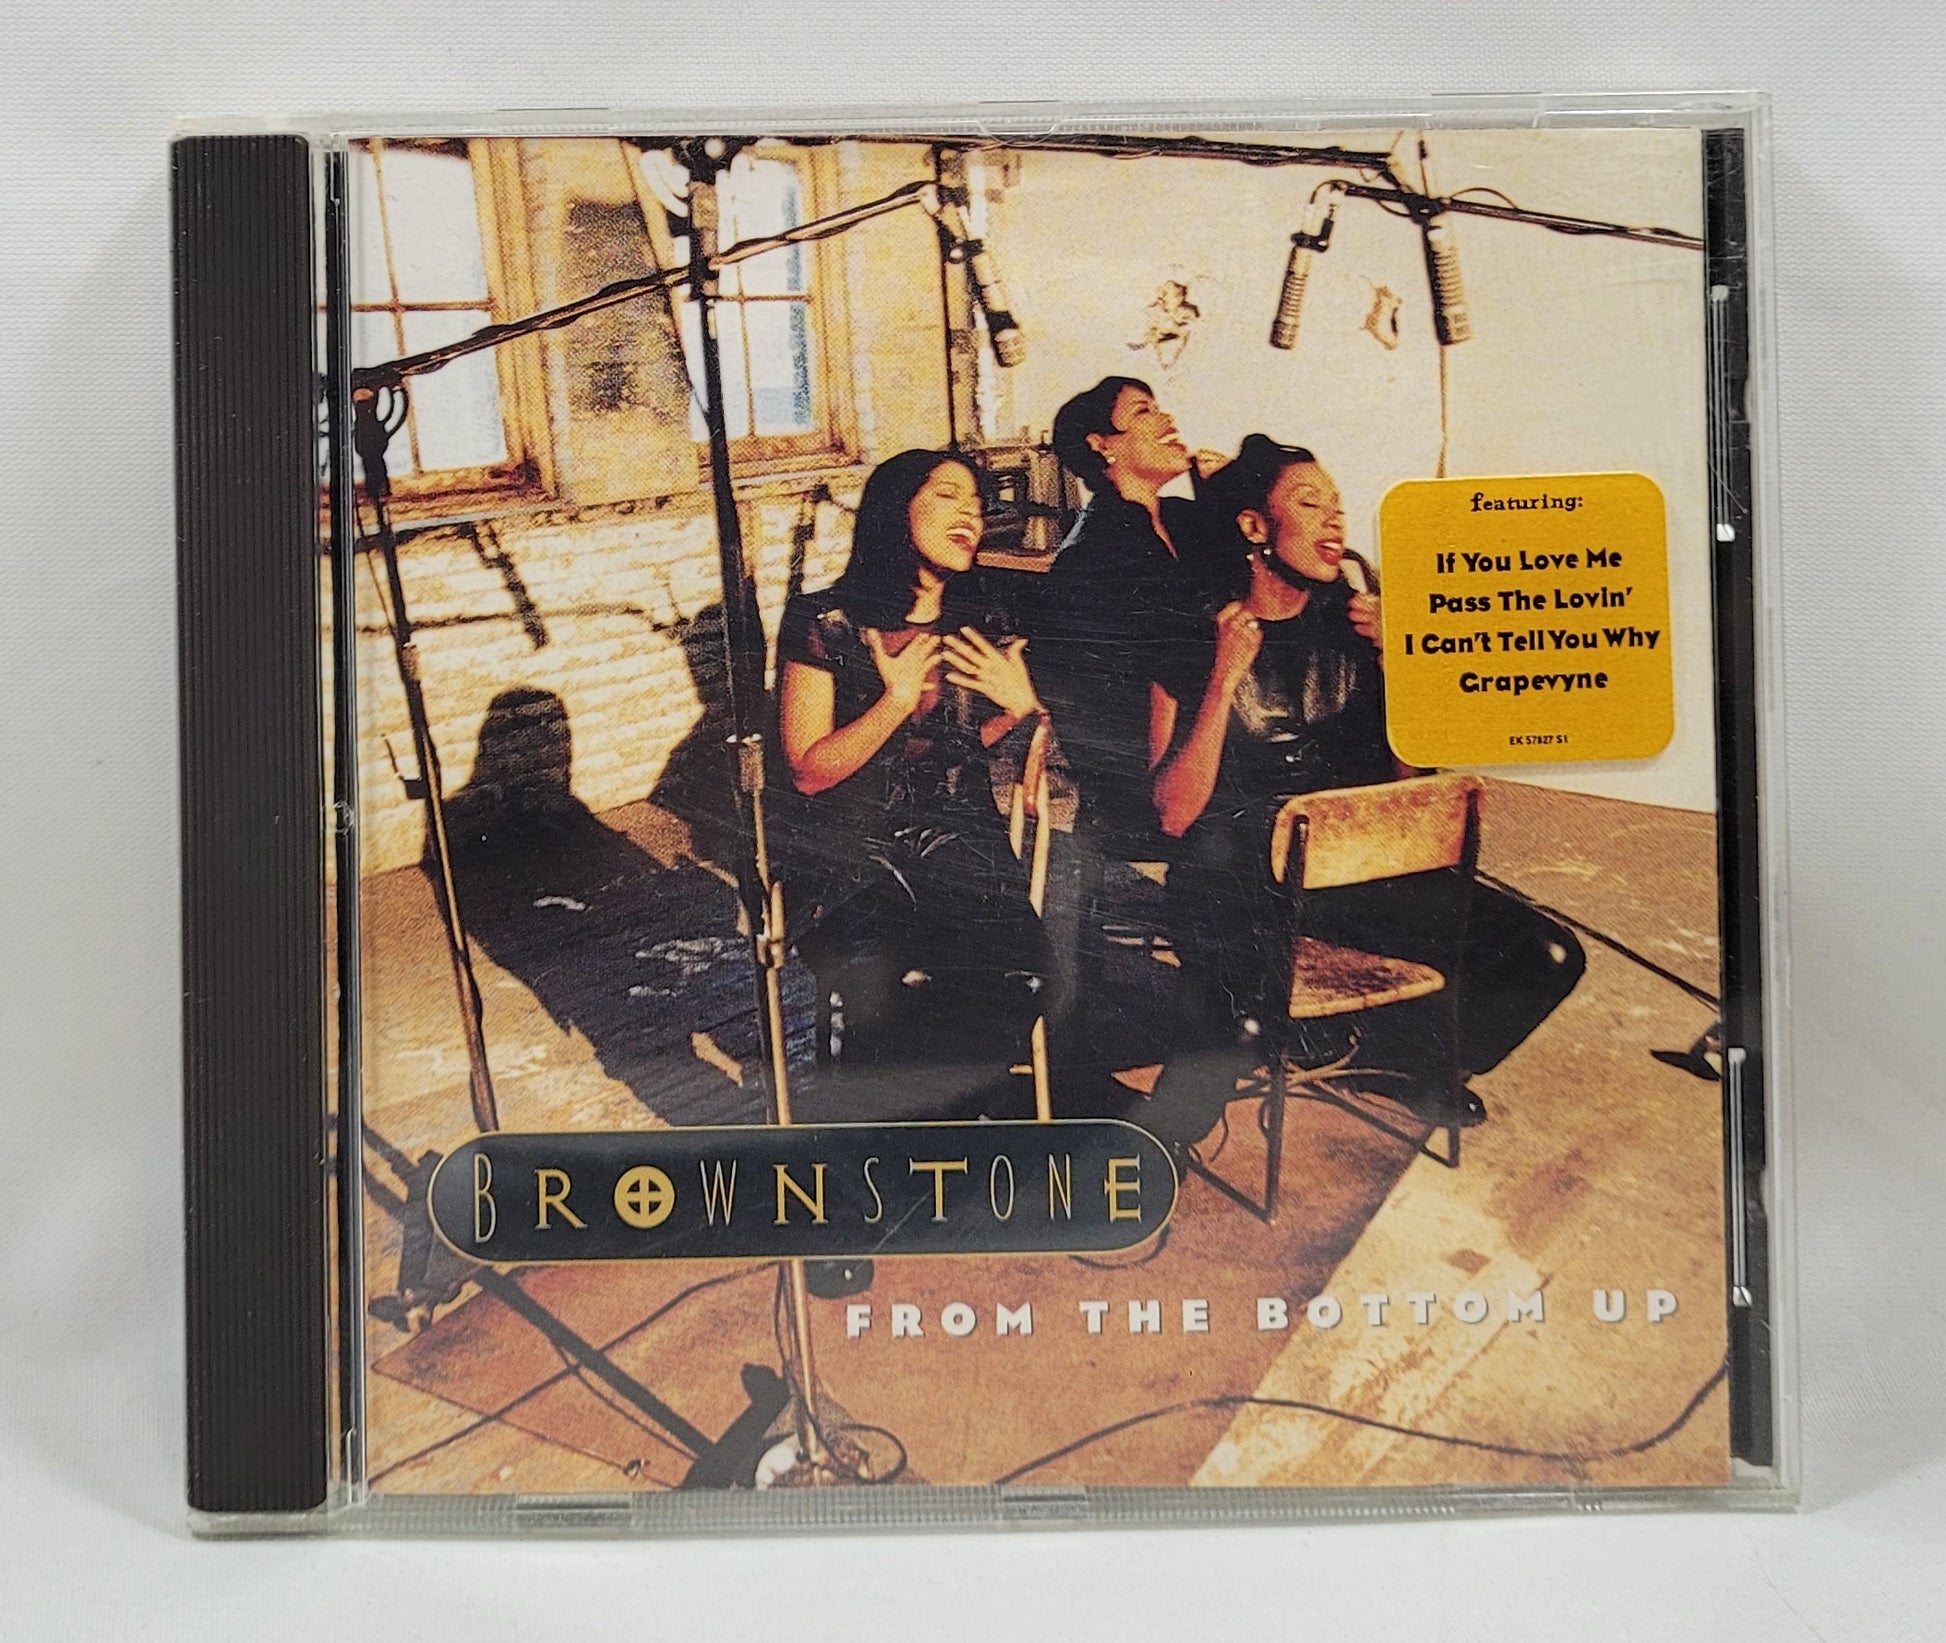 Brownstone - From the Bottom Up [1994 Used CD]